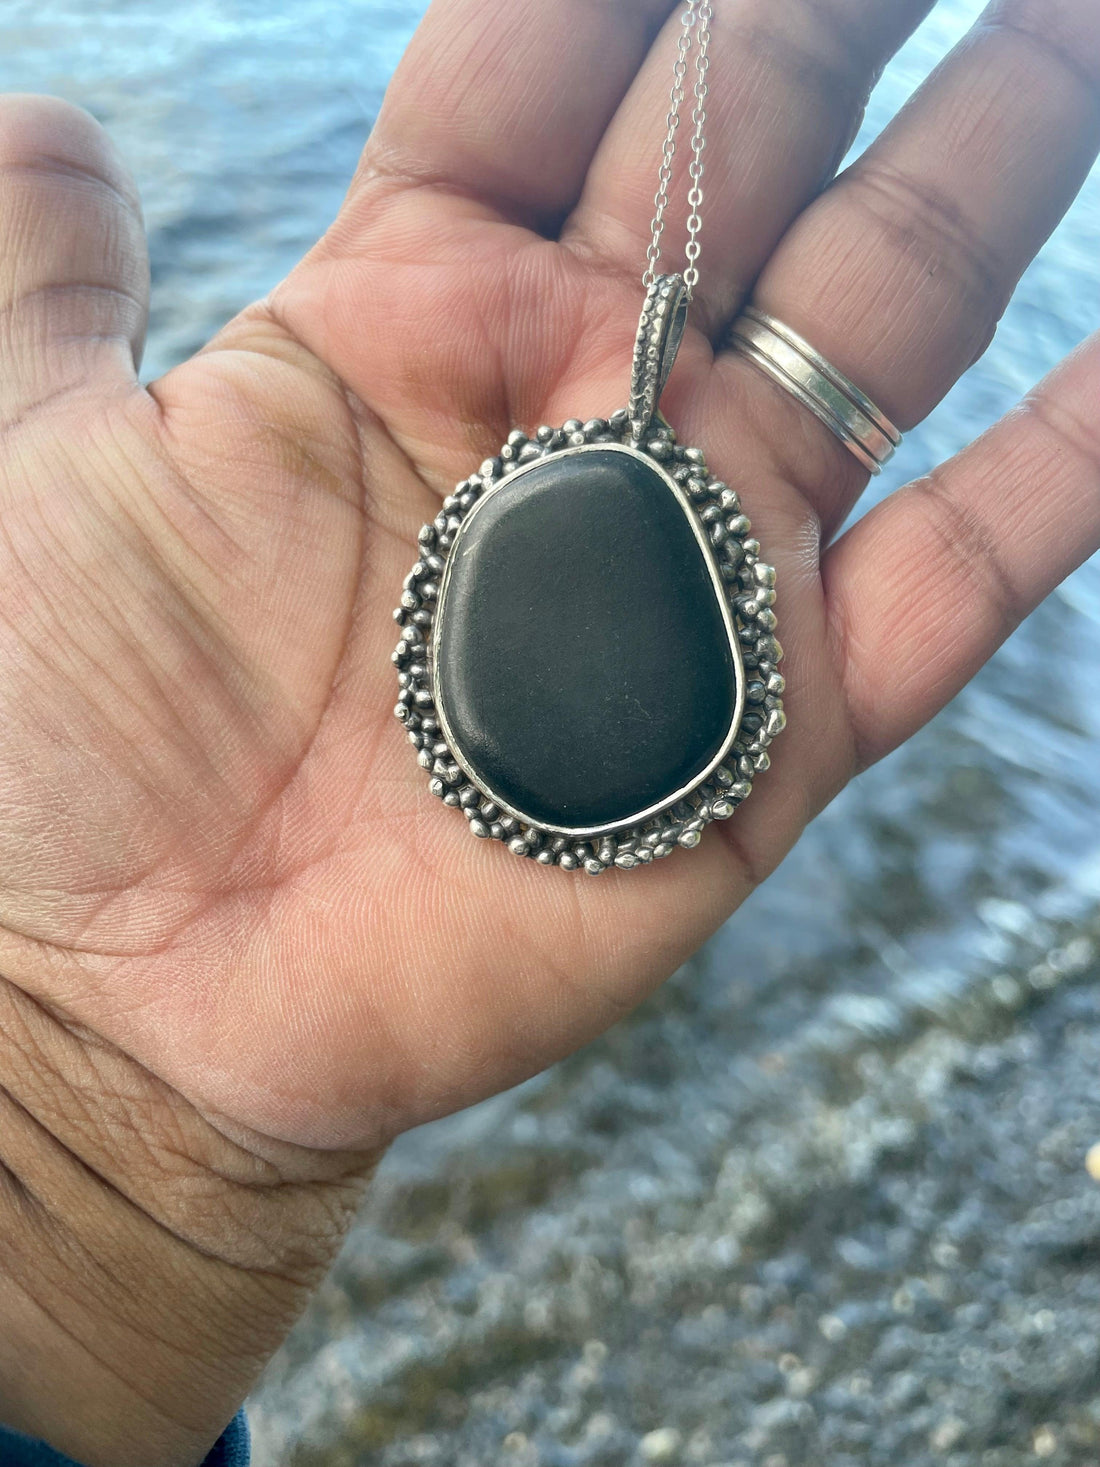 Black Beach Stone Necklace in my hand. Black Beach Stone Necklace by the sea. Bohemian necklace Bold necklace Beautiful necklace Sterling silver necklace Goddess necklace Sexy necklace Textured necklace Statement necklace Unique necklace  Cosmic necklace Black Necklace